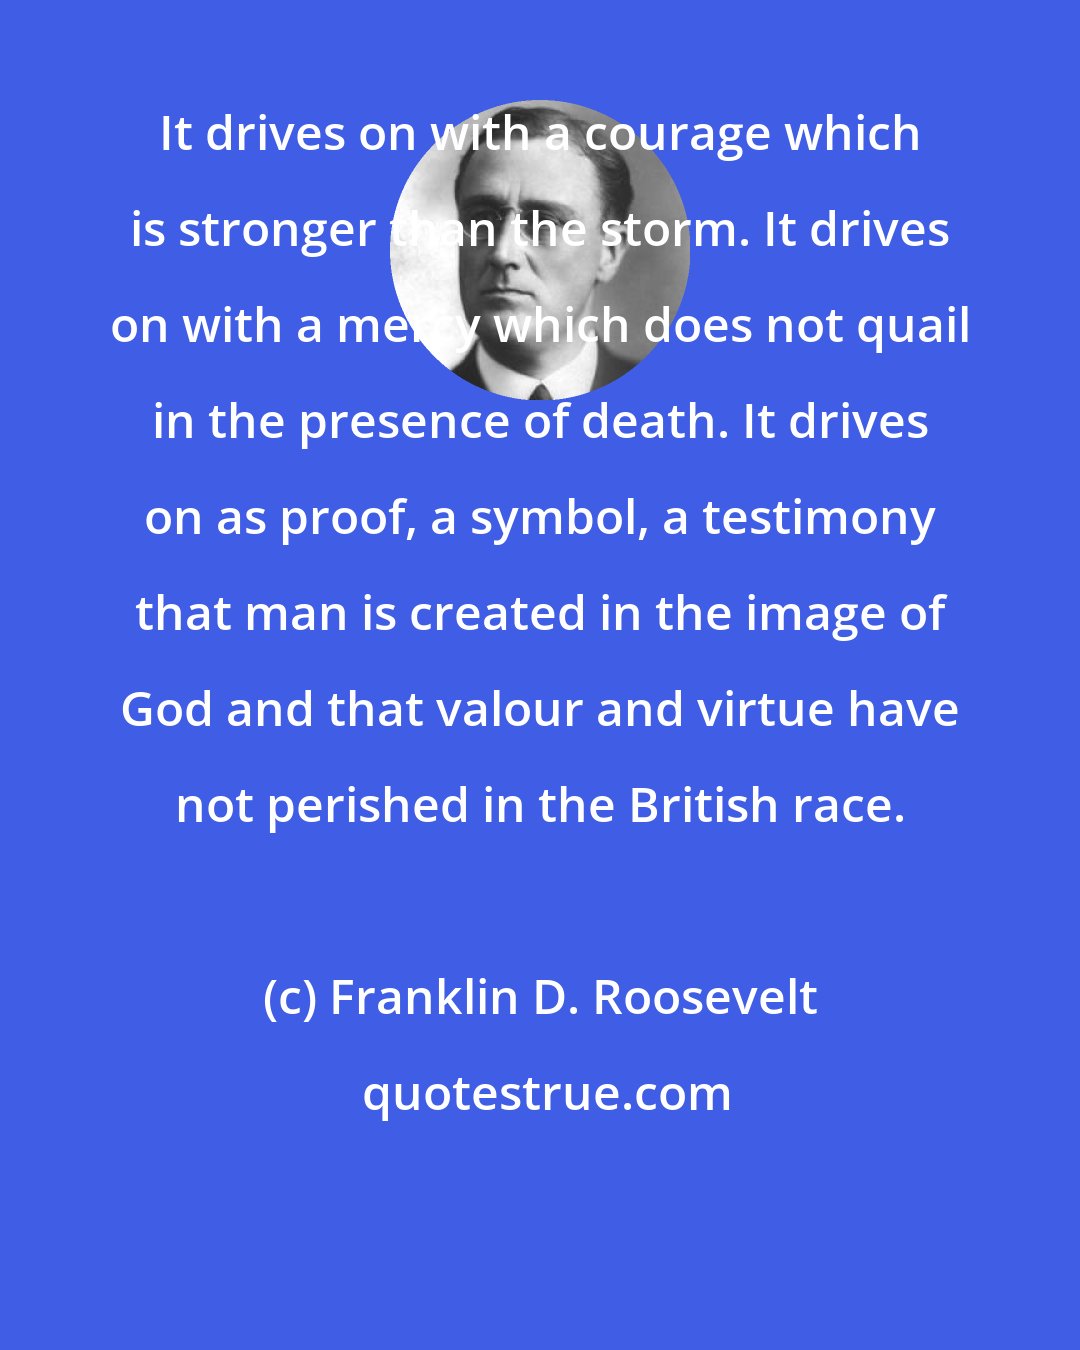 Franklin D. Roosevelt: It drives on with a courage which is stronger than the storm. It drives on with a mercy which does not quail in the presence of death. It drives on as proof, a symbol, a testimony that man is created in the image of God and that valour and virtue have not perished in the British race.